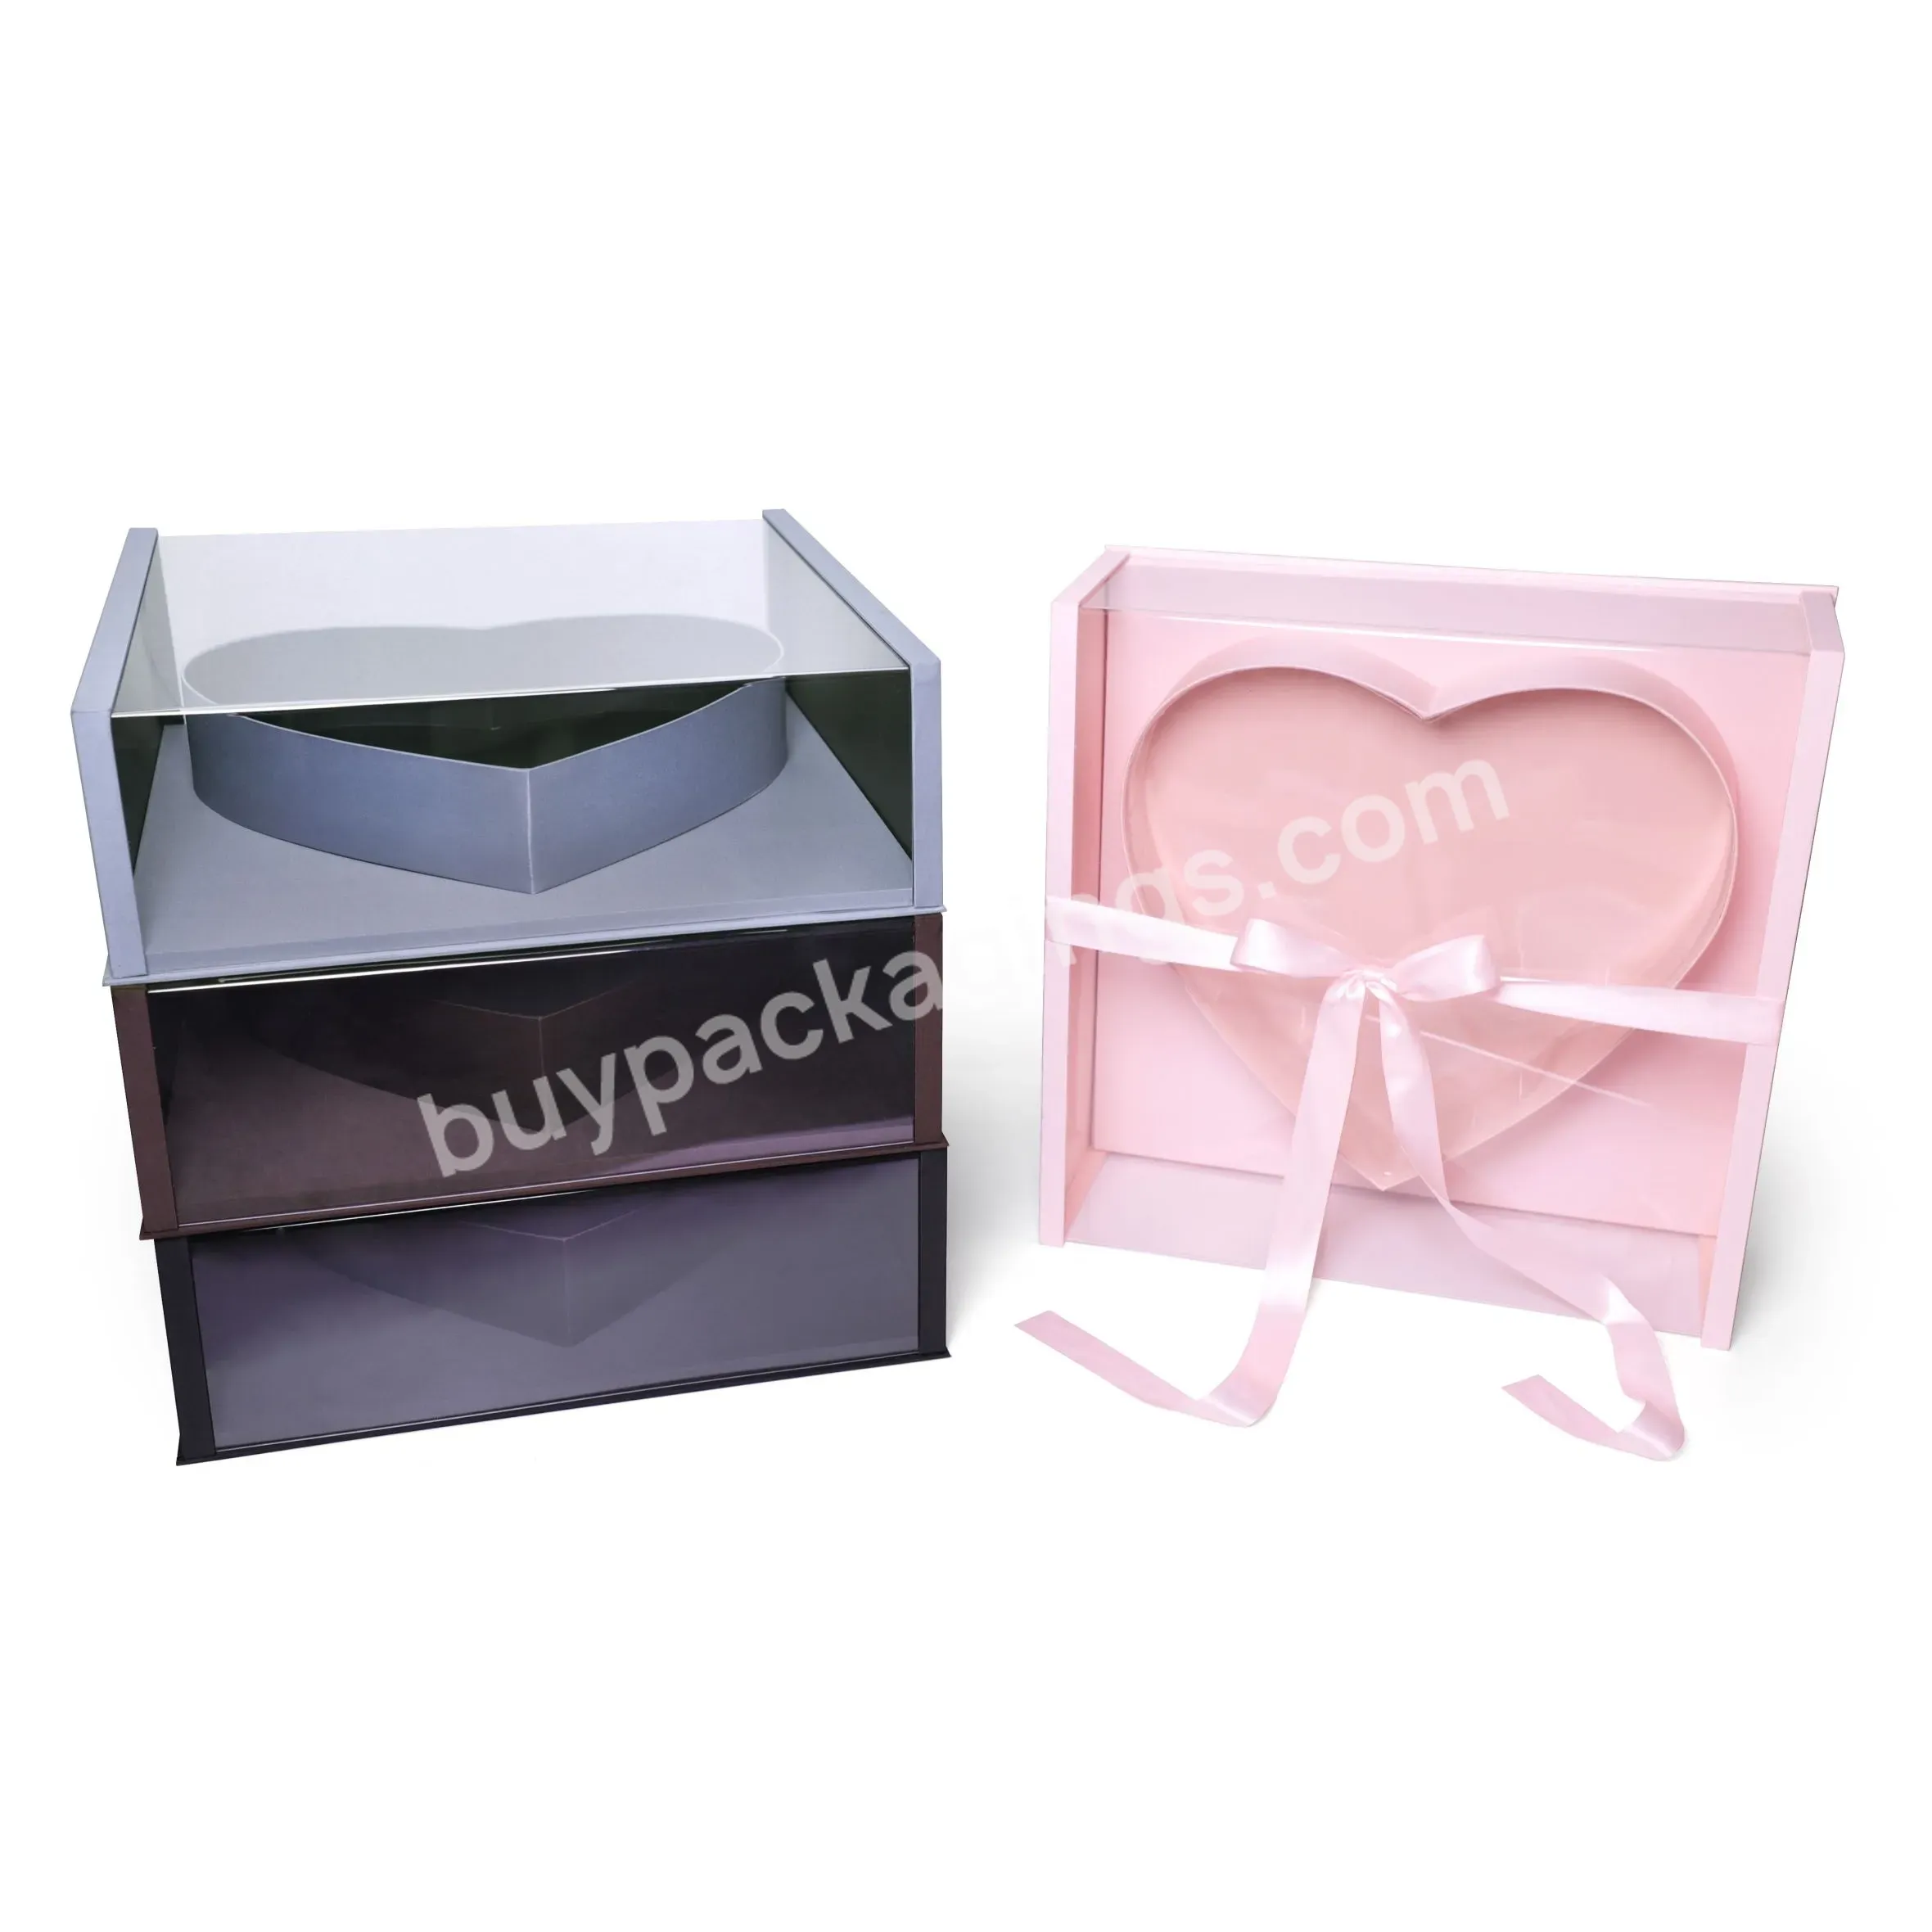 Premium Quality Square Flower Gift Boxes Silk Surface Finish Acrylic Box With Heart-shaped Slot - Buy Premium Quality Square Flower Gift Boxes,Silk Surface Finish Acrylic Box,Acrylic Box With Heart-shaped Slot.